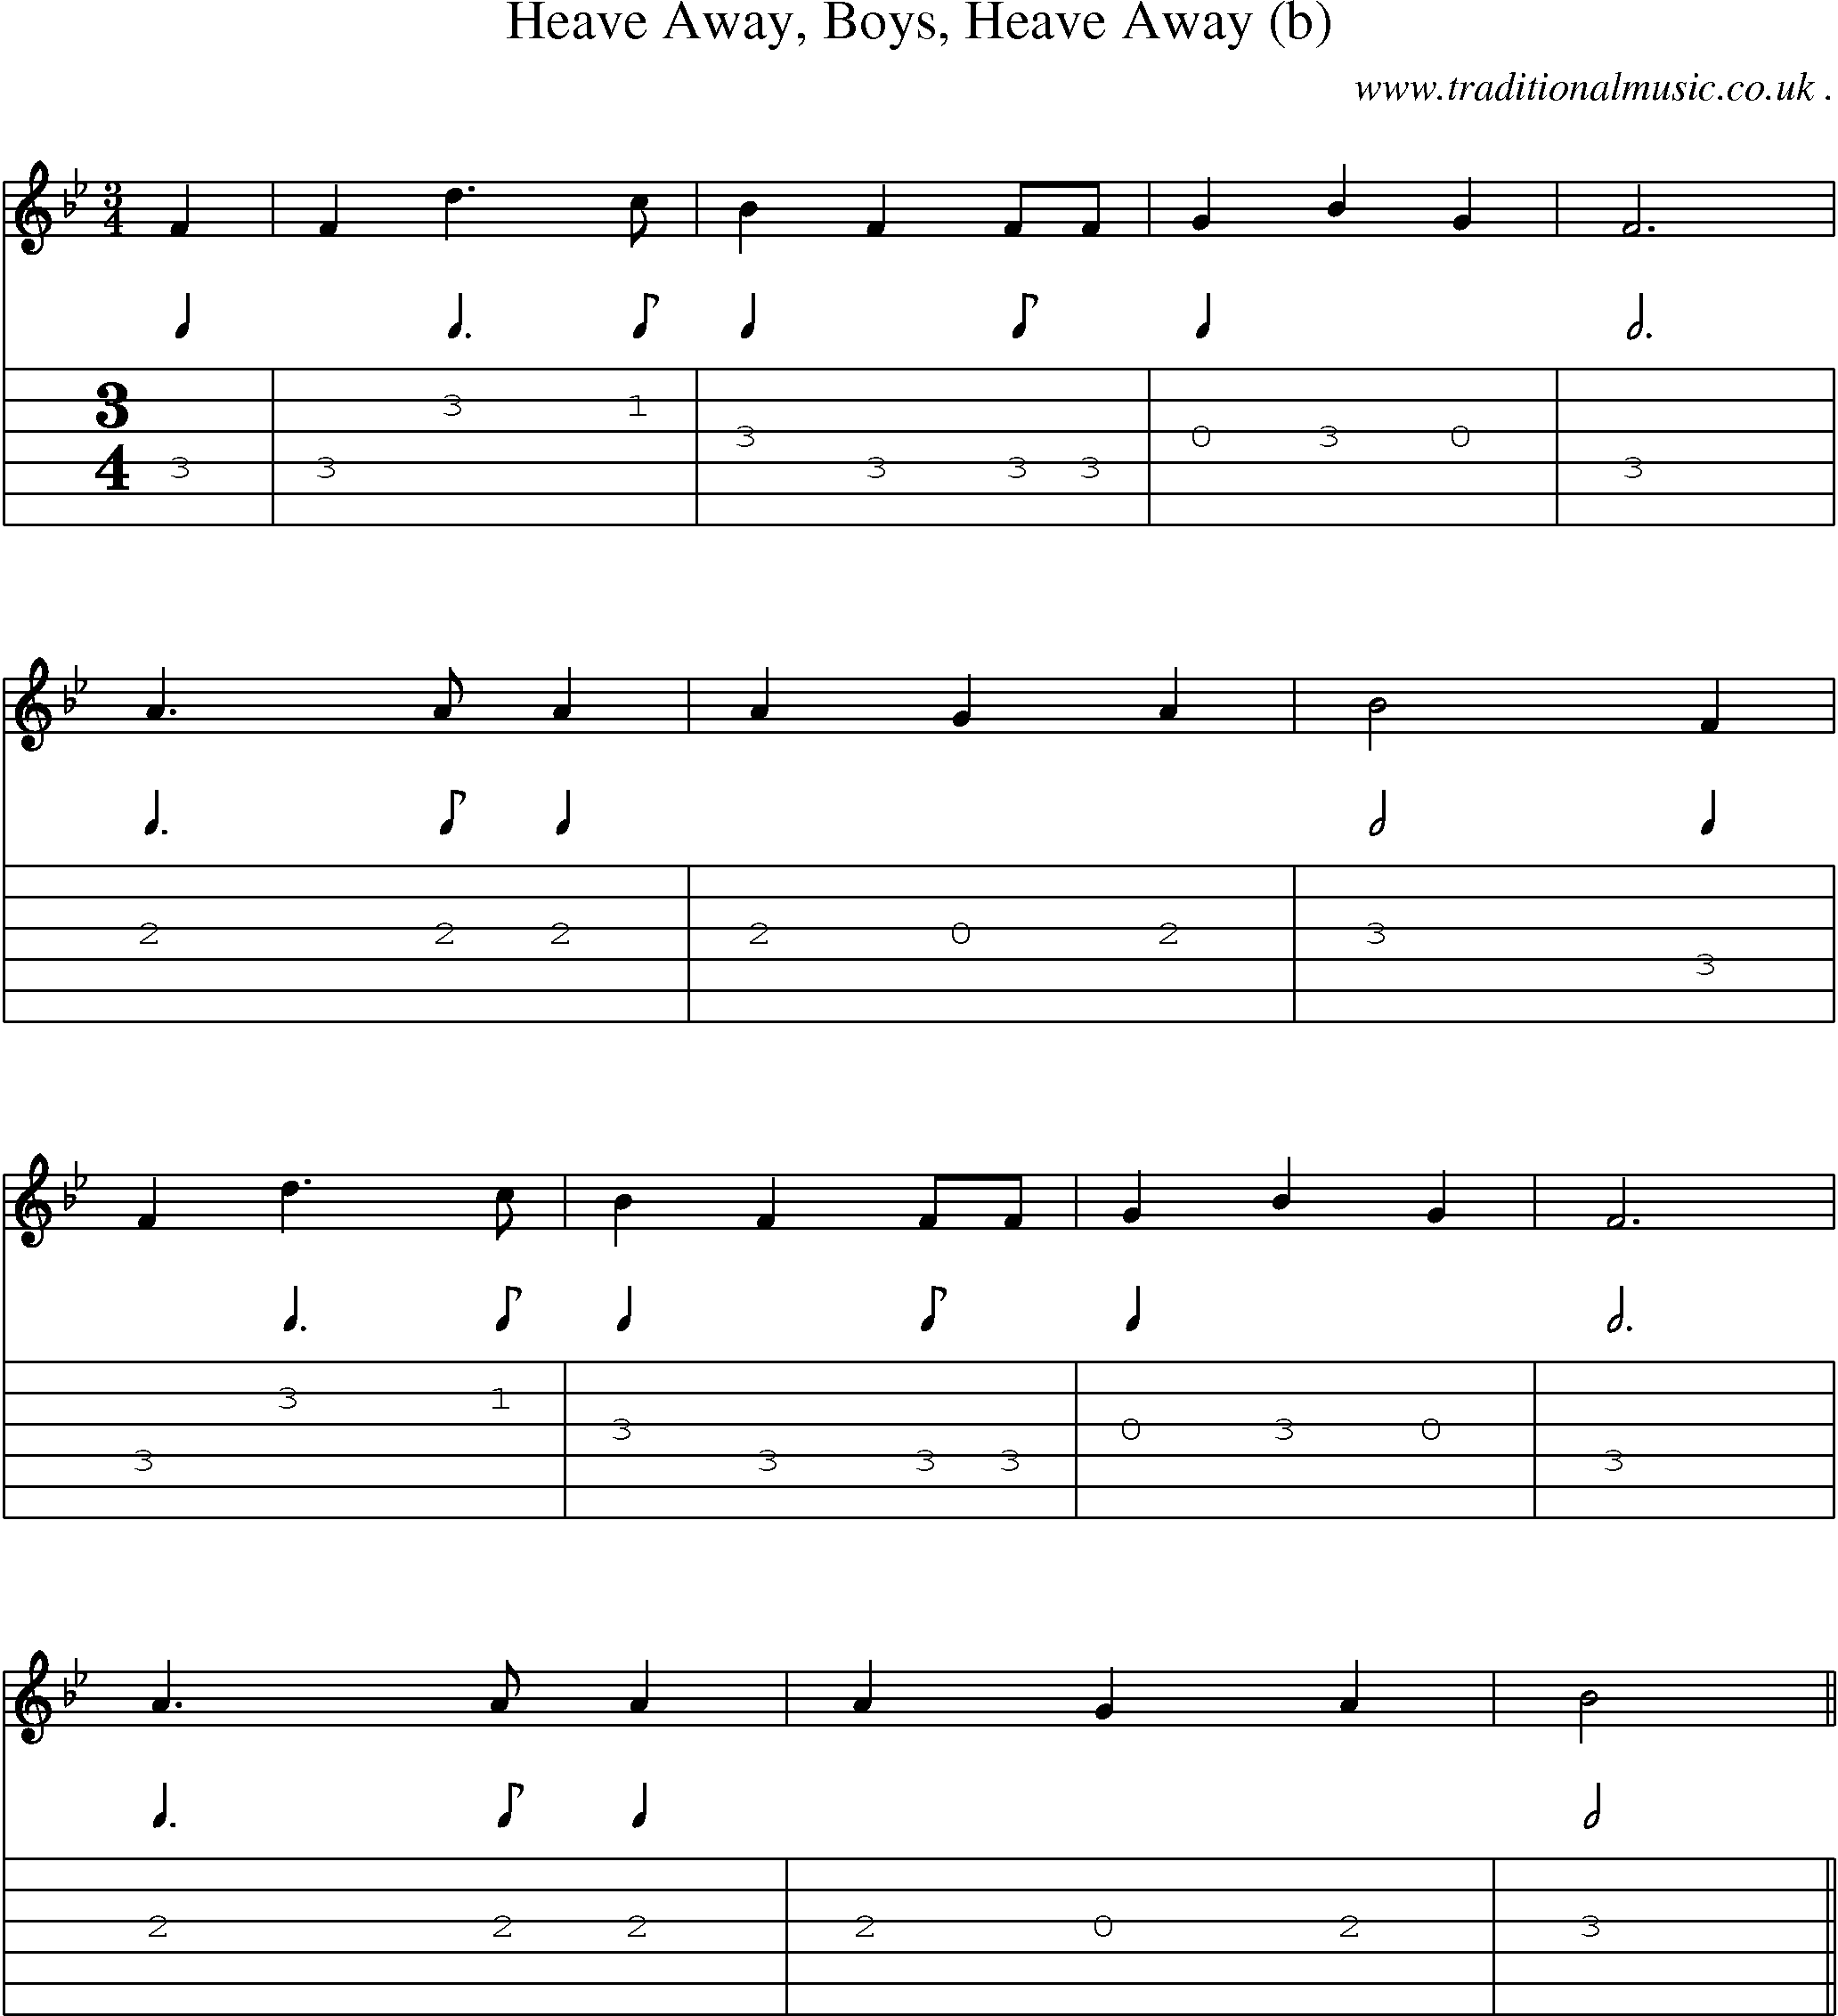 Sheet-Music and Guitar Tabs for Heave Away Boys Heave Away (b)